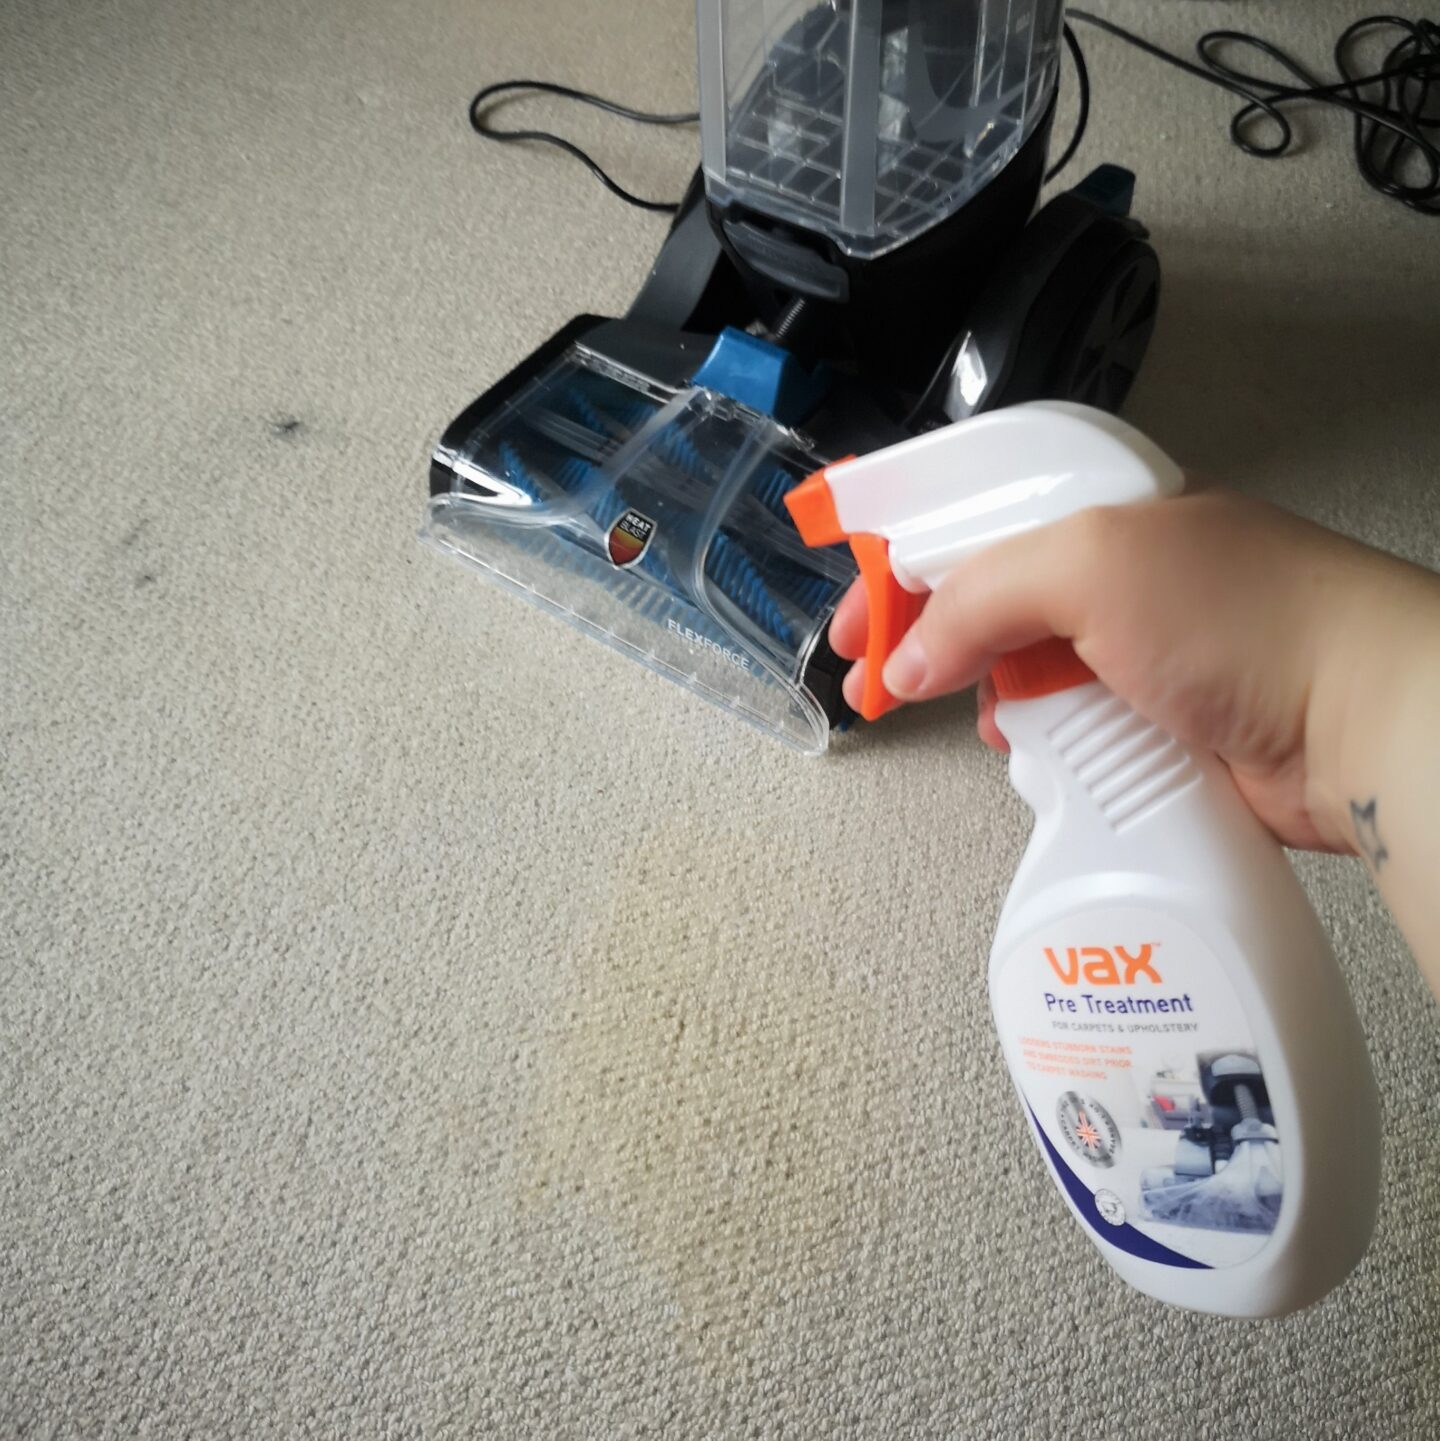 Vax Platinum SmartWash Carpet Cleaner Review, Vax, Carpet Cleaner, Home Appliances, Review, Motion Sense Technology, Carpet Cleaning, Home & Garden, The Frenchie Mummy, Vax Platinum SmartWash, Carpet Cleaner